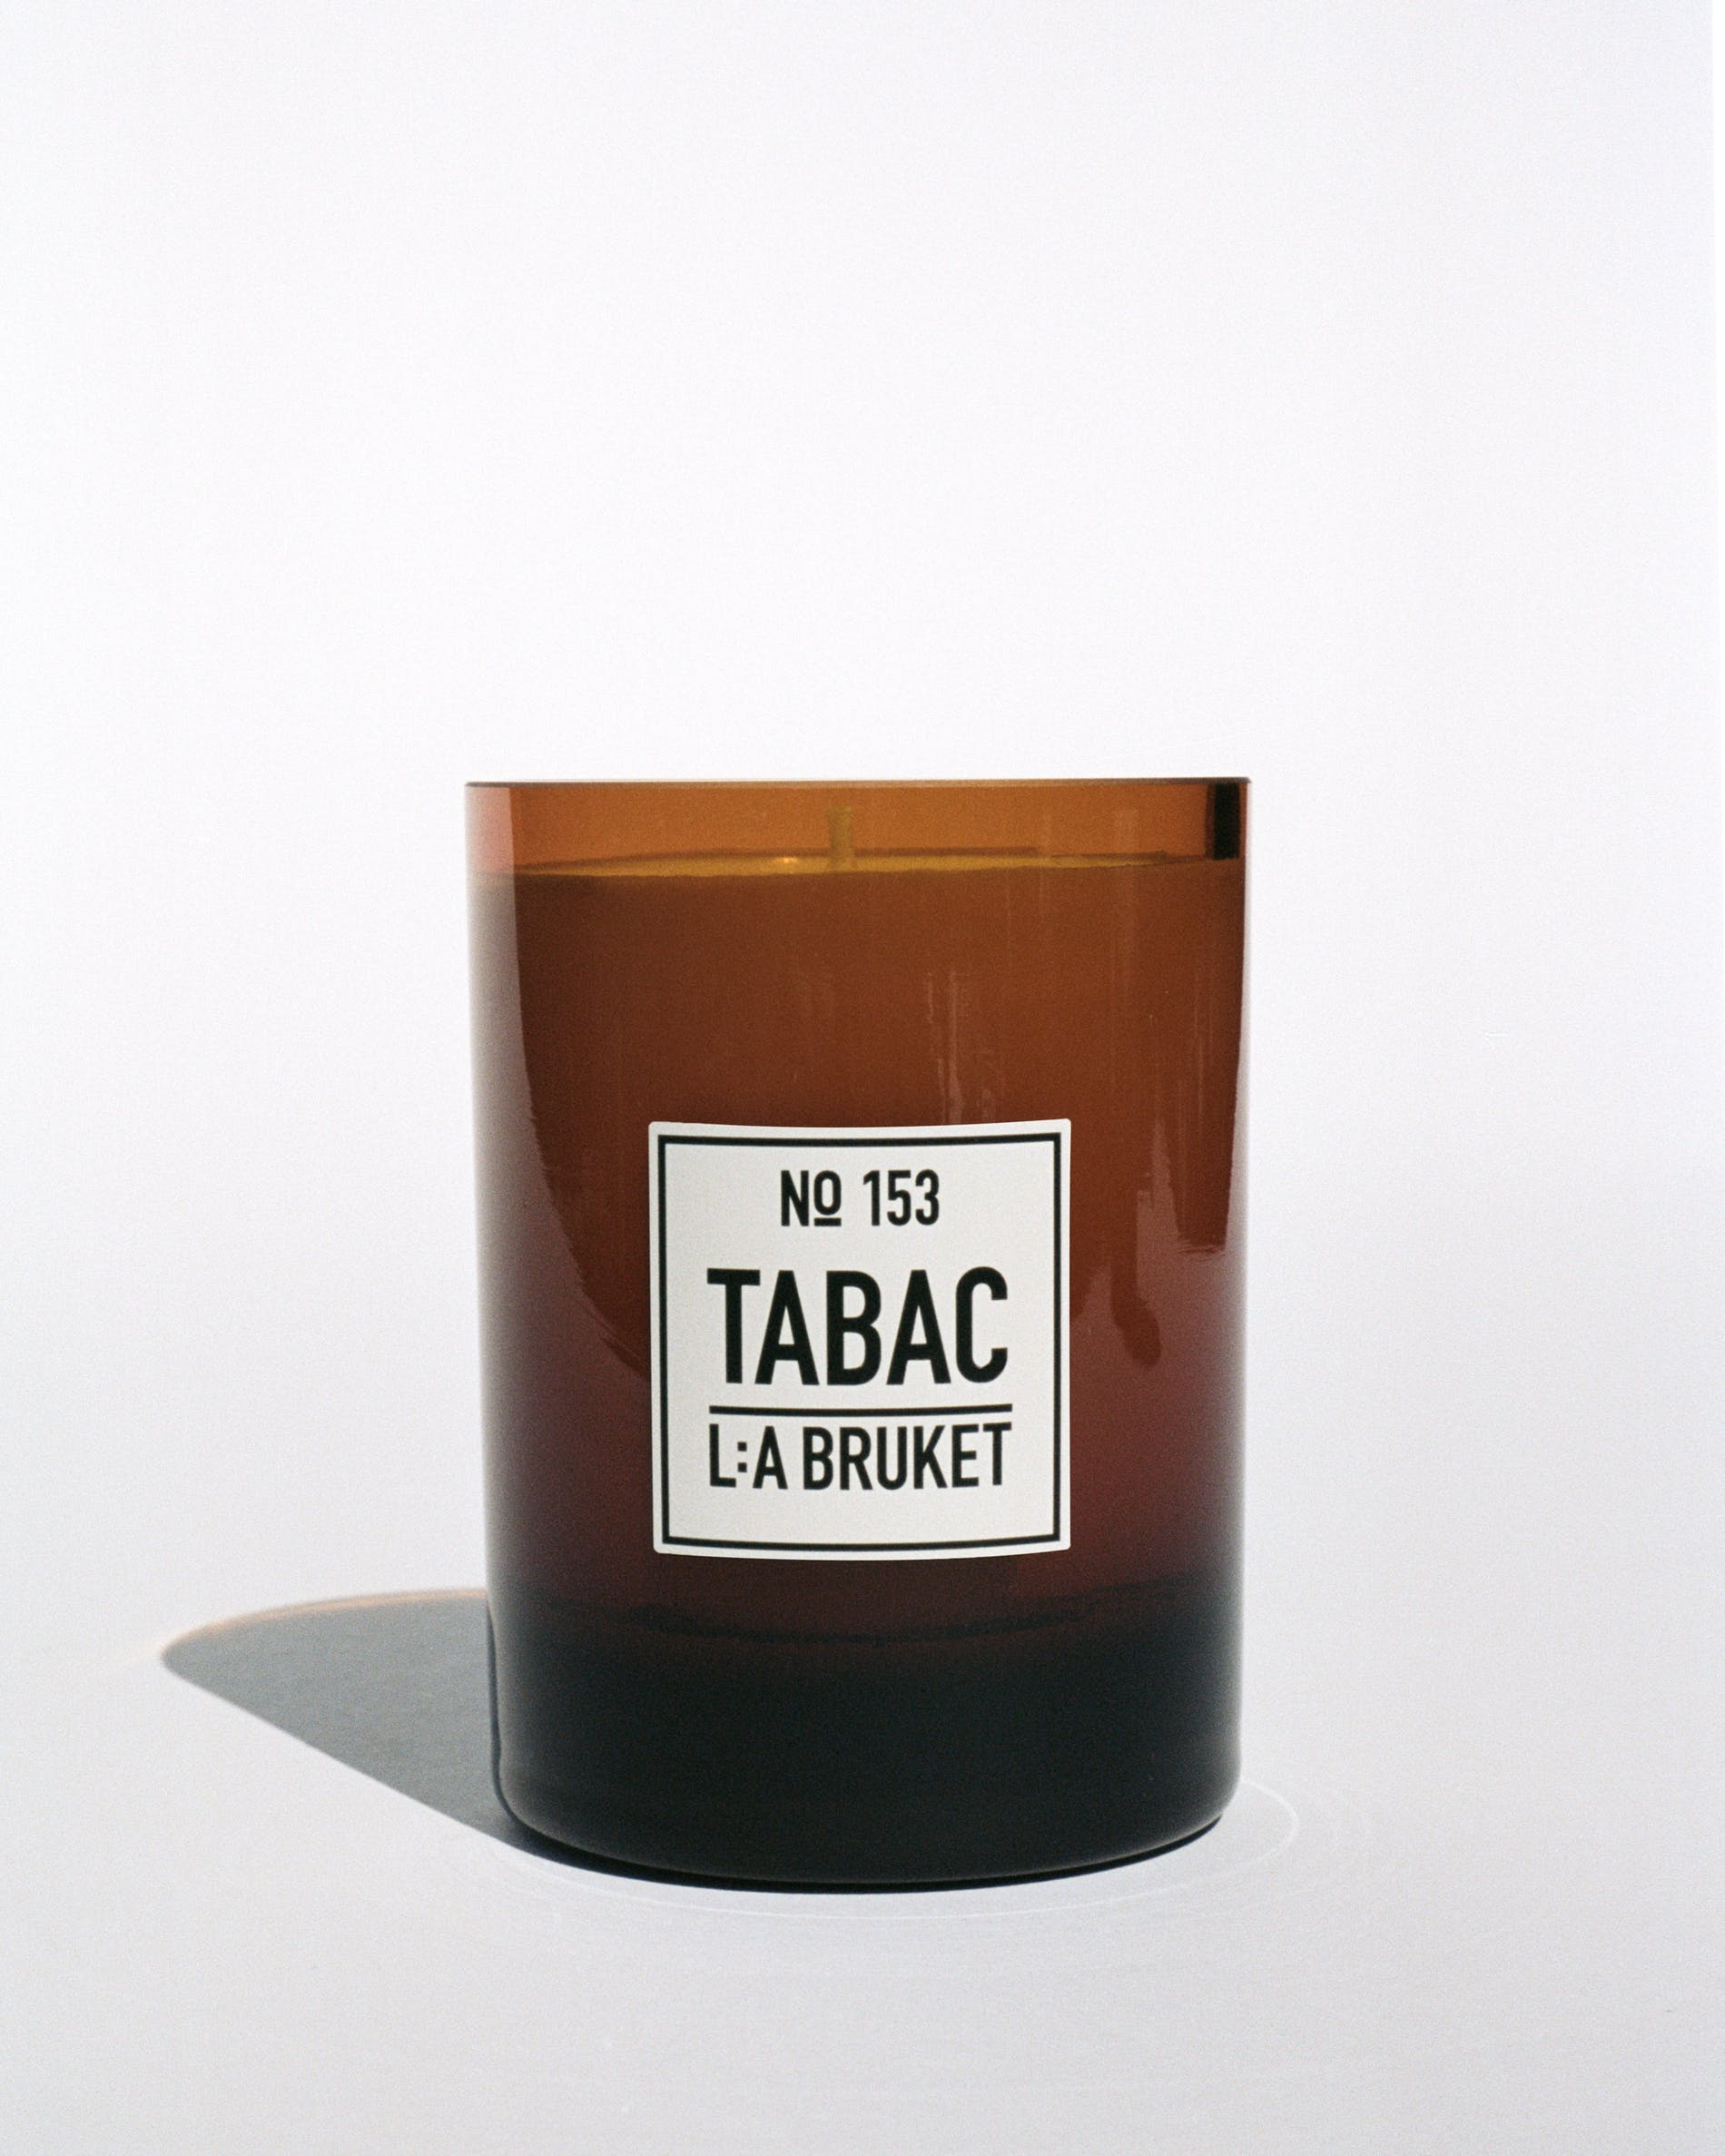 L:A Bruket candle in tabac